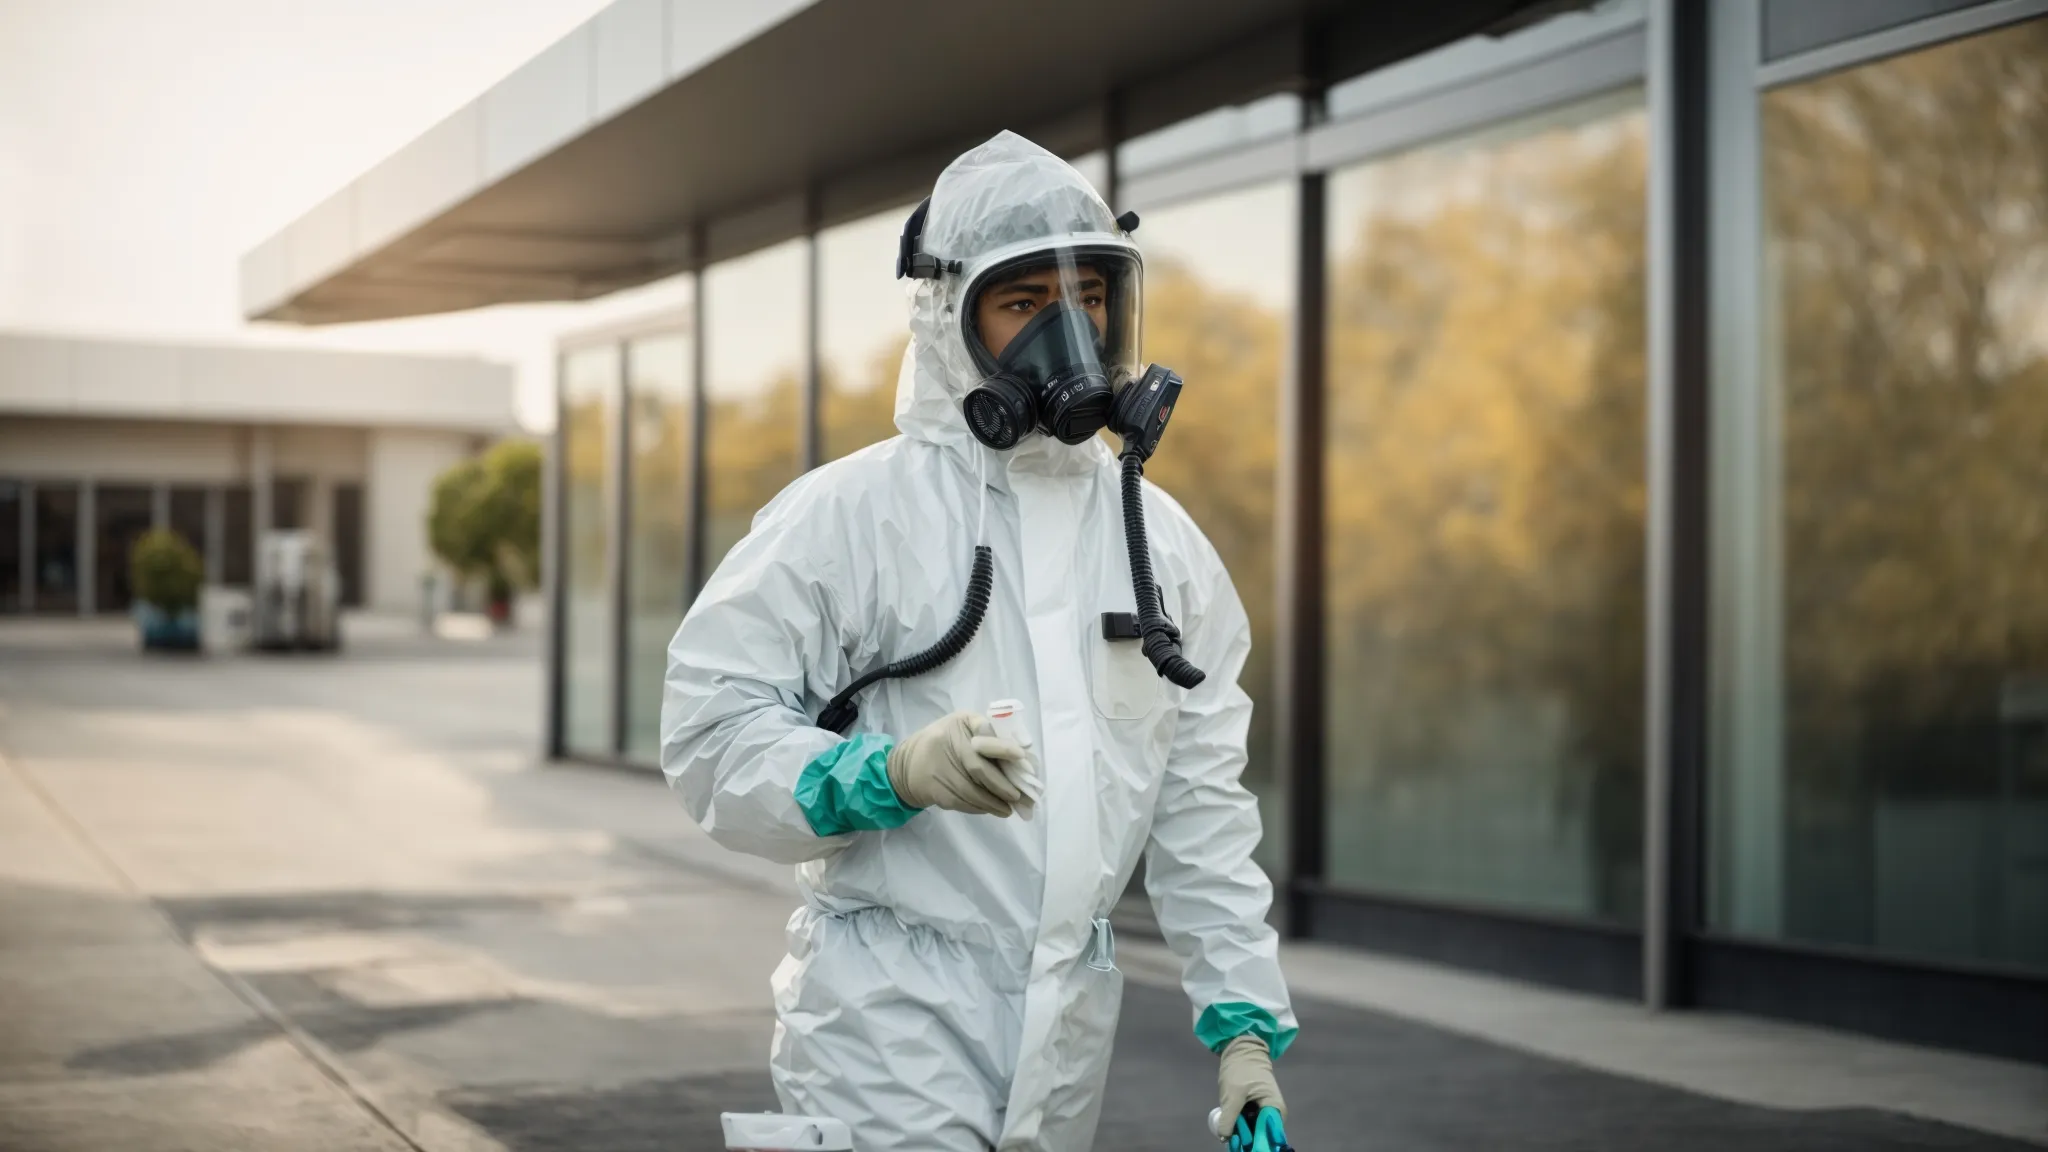 a professional, wearing protective gear, sprays environmentally friendly pesticide around the exterior of a commercial building to prevent pest infestation.